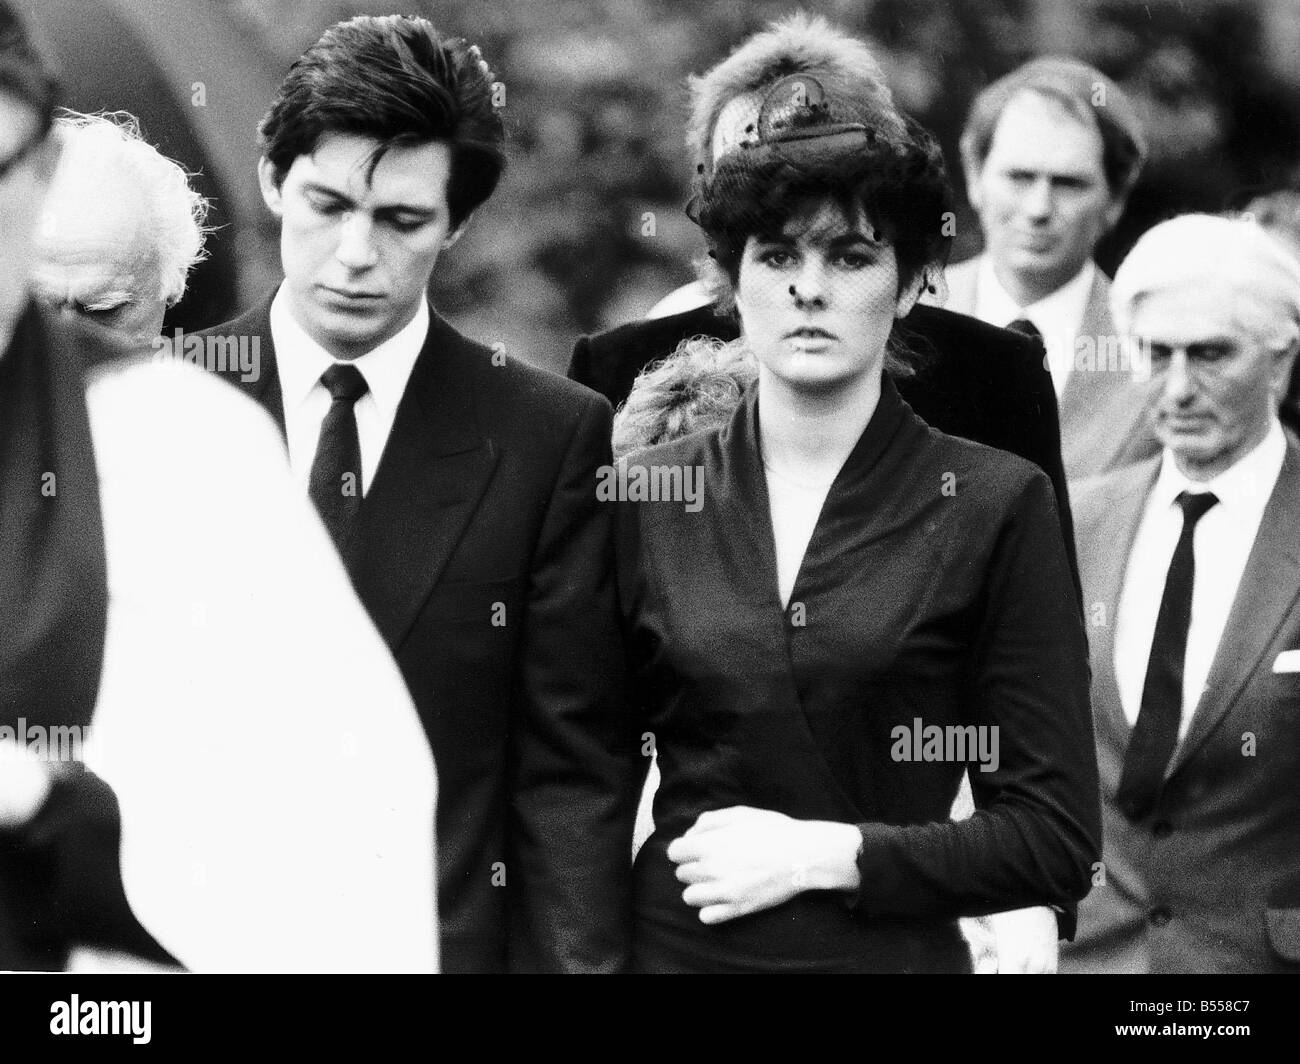 Jeremy Bamber Murder Who killed five members of his family at the family  funeral with girlfriend Julie Mugford Dbase MSI MurderCaseBamber Stock  Photo - Alamy